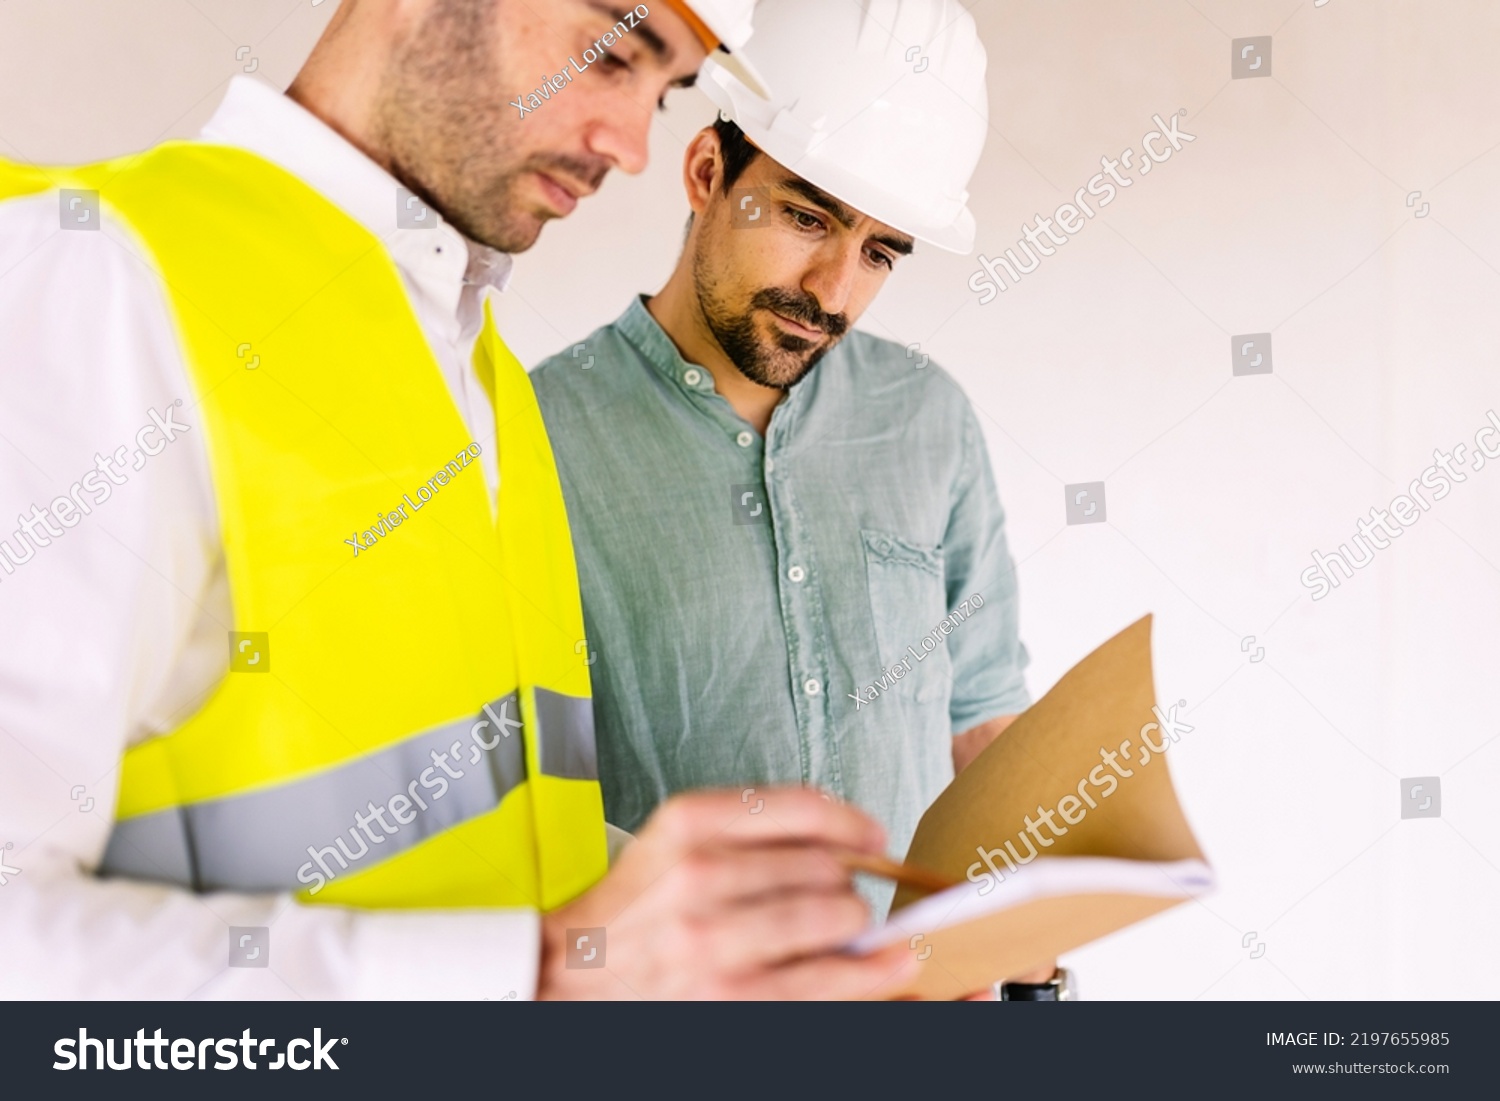 Two construction workers collaborating on something out of a book.